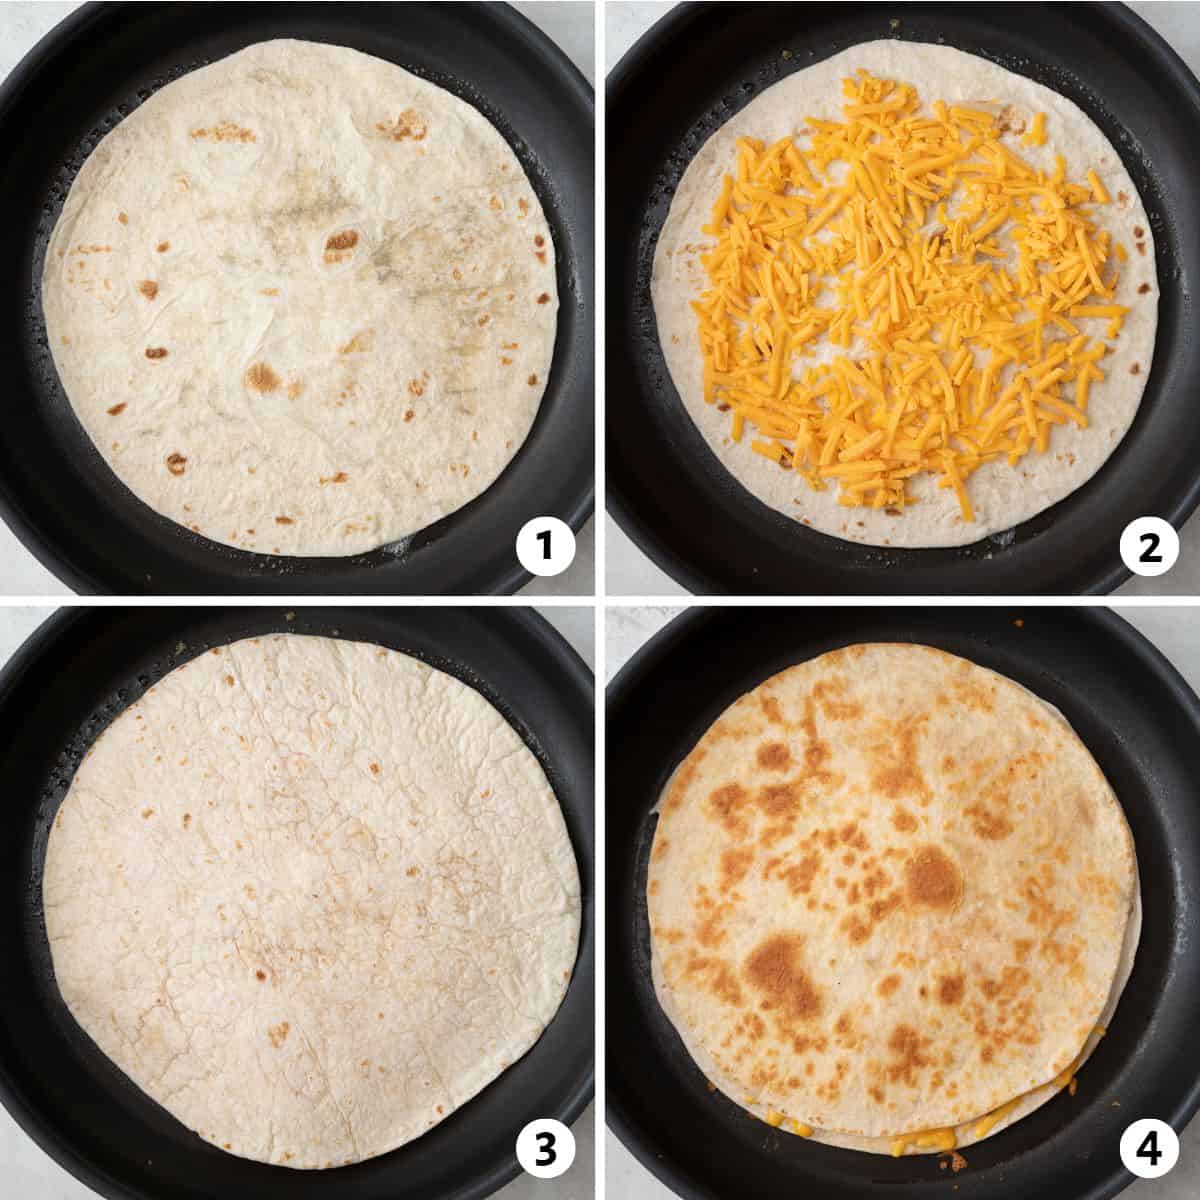 4 image collage making recipe: 1- tortilla in a pan, 2- cheese added on top, 3- another tortilla added on top of cheese, and 4- after flipping to show golden brown crust.